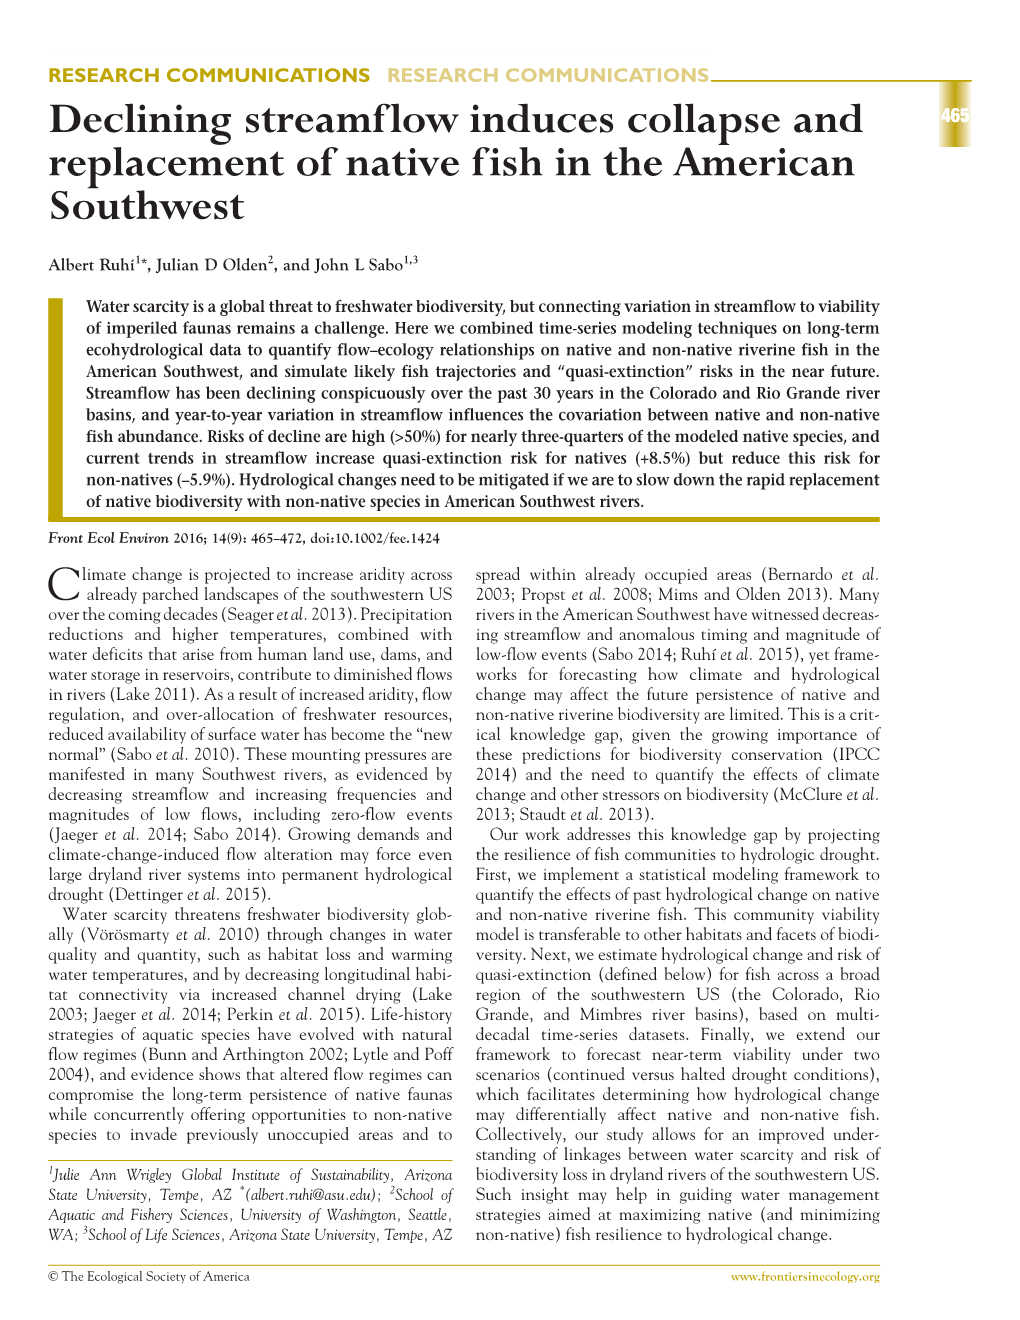 Declining Streamflow Induces Collapse and Replacement of Native Fish In